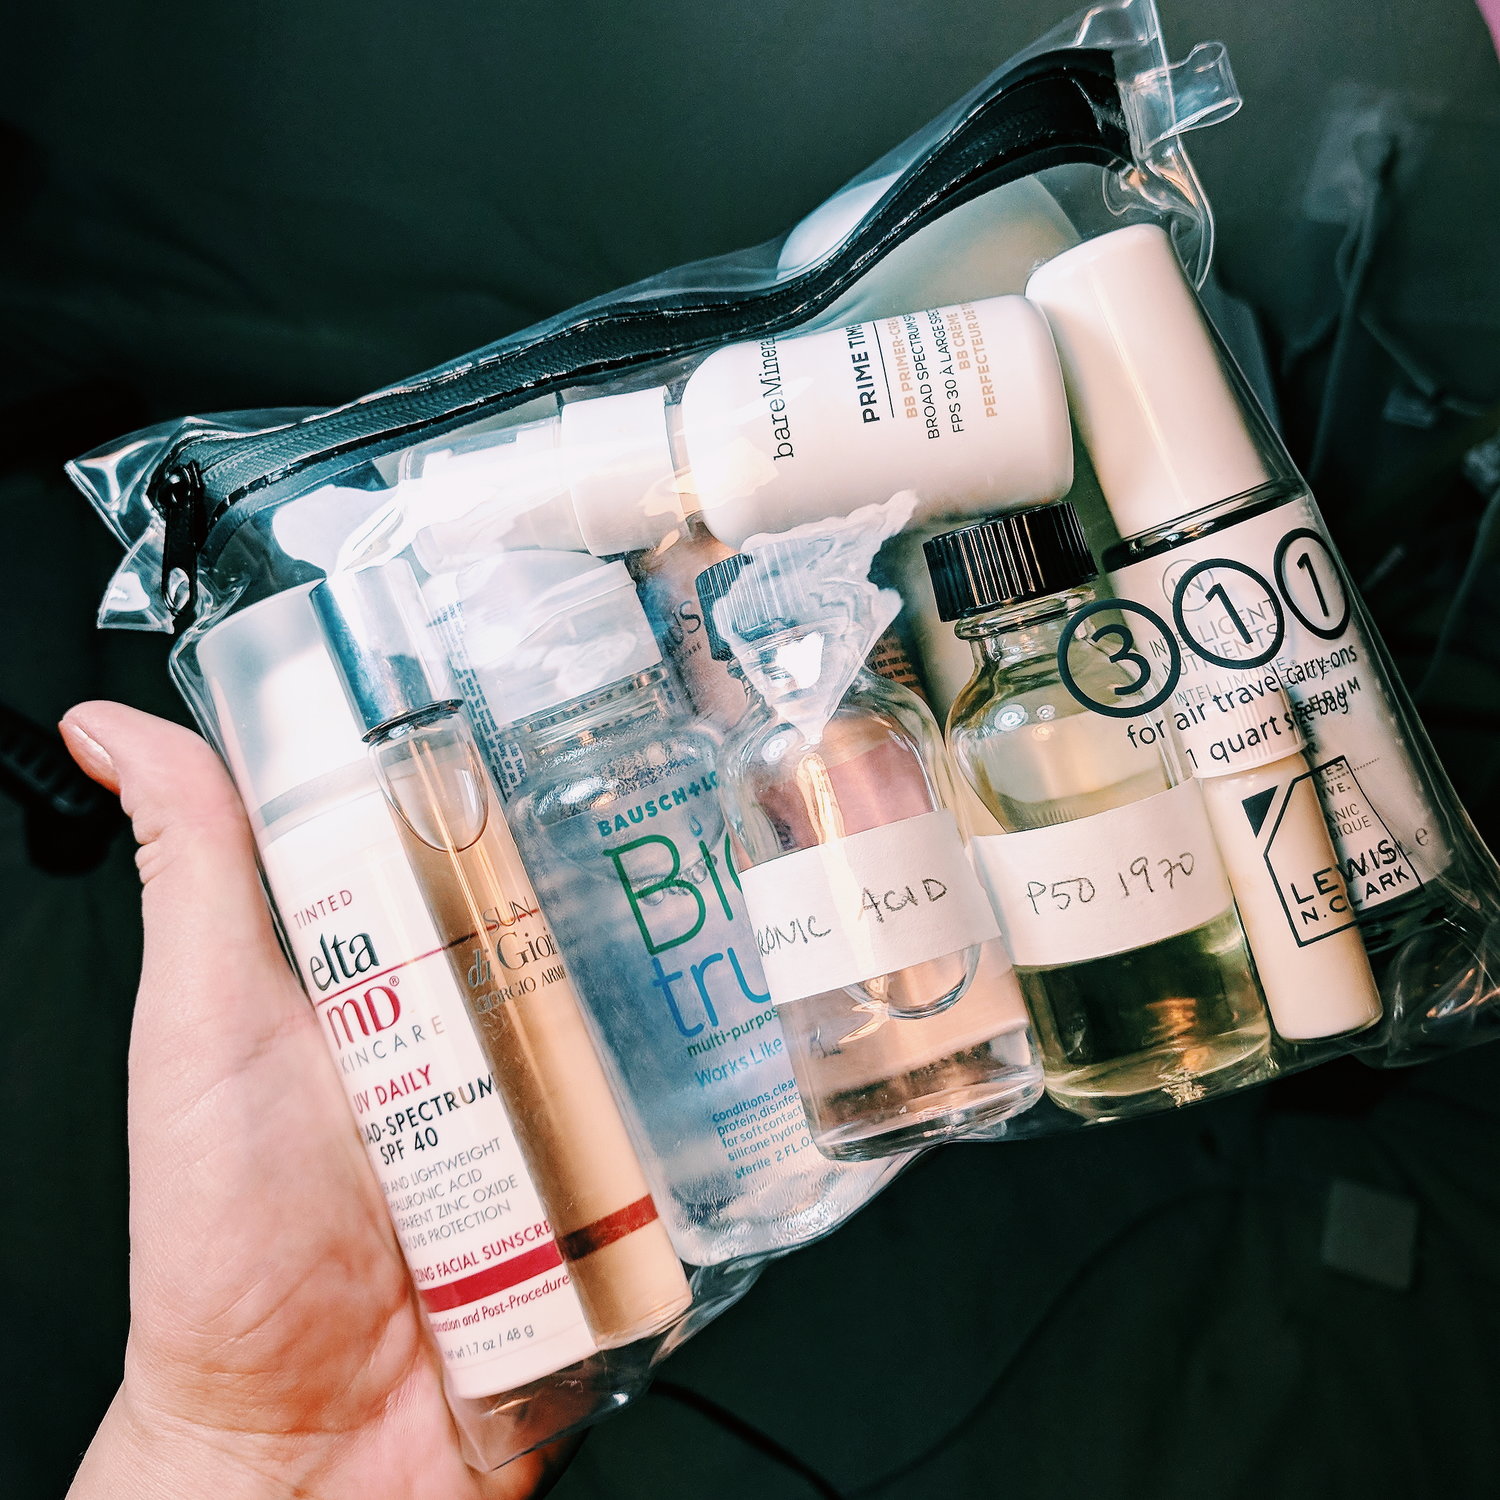 How to Pack for the TSA – Fitting it all in that Little Quart Bag